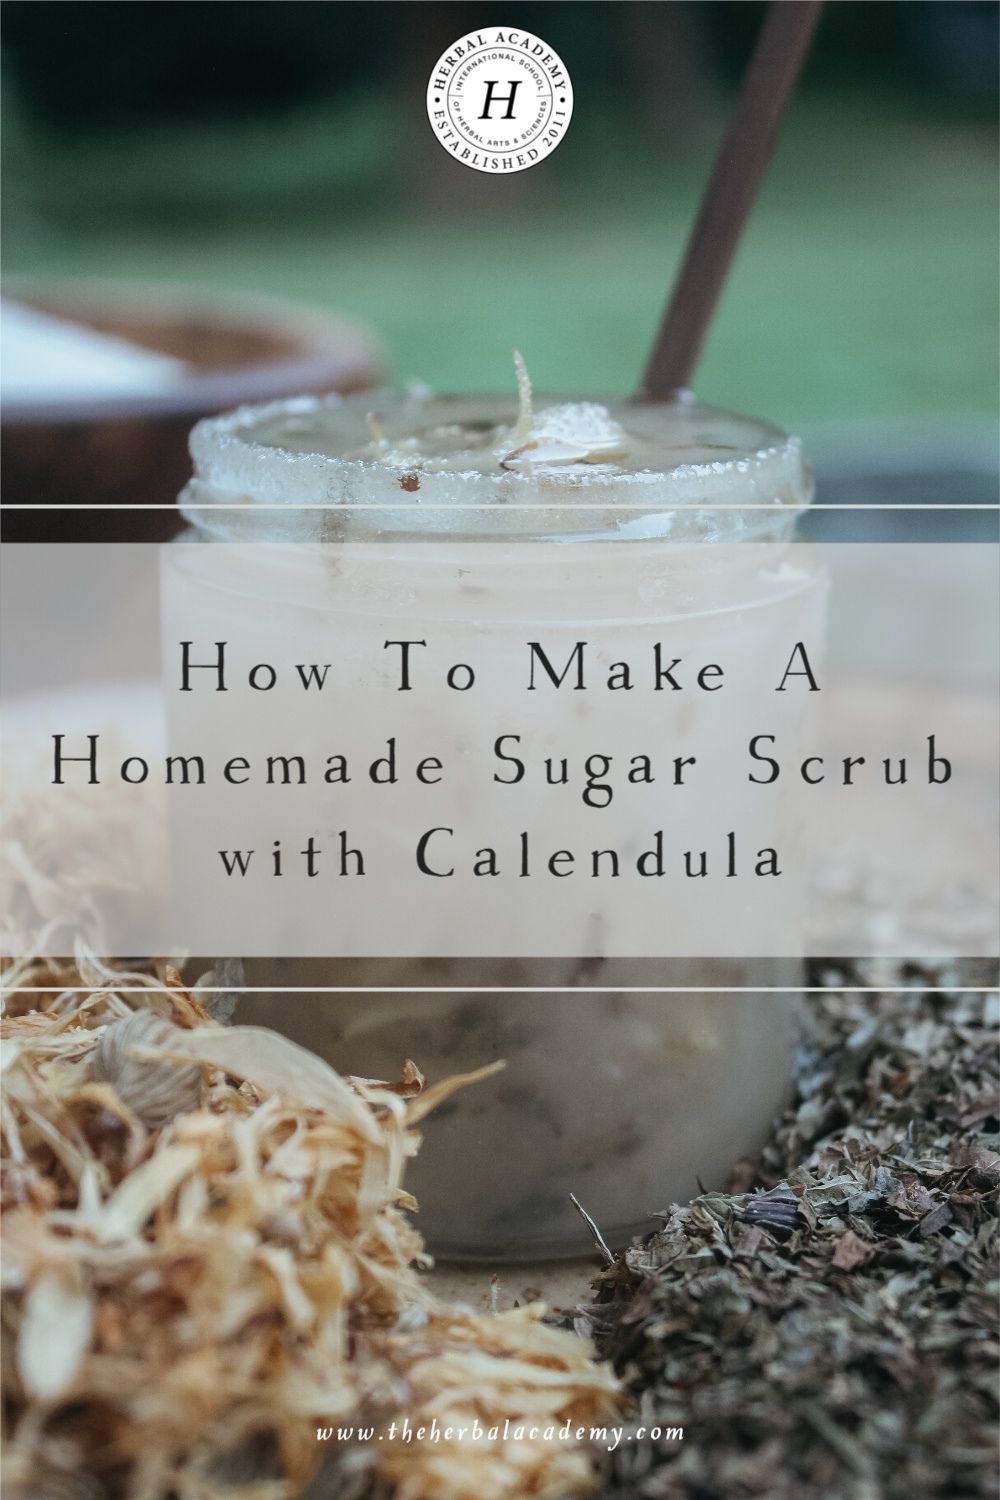 How To Make A Homemade Sugar Scrub with Calendula | Herbal Academy | When it comes to sugar scrubs, you can use only carrier oils and sugar, but where's the fun in that? This homemade sugar scrub uses calendula.